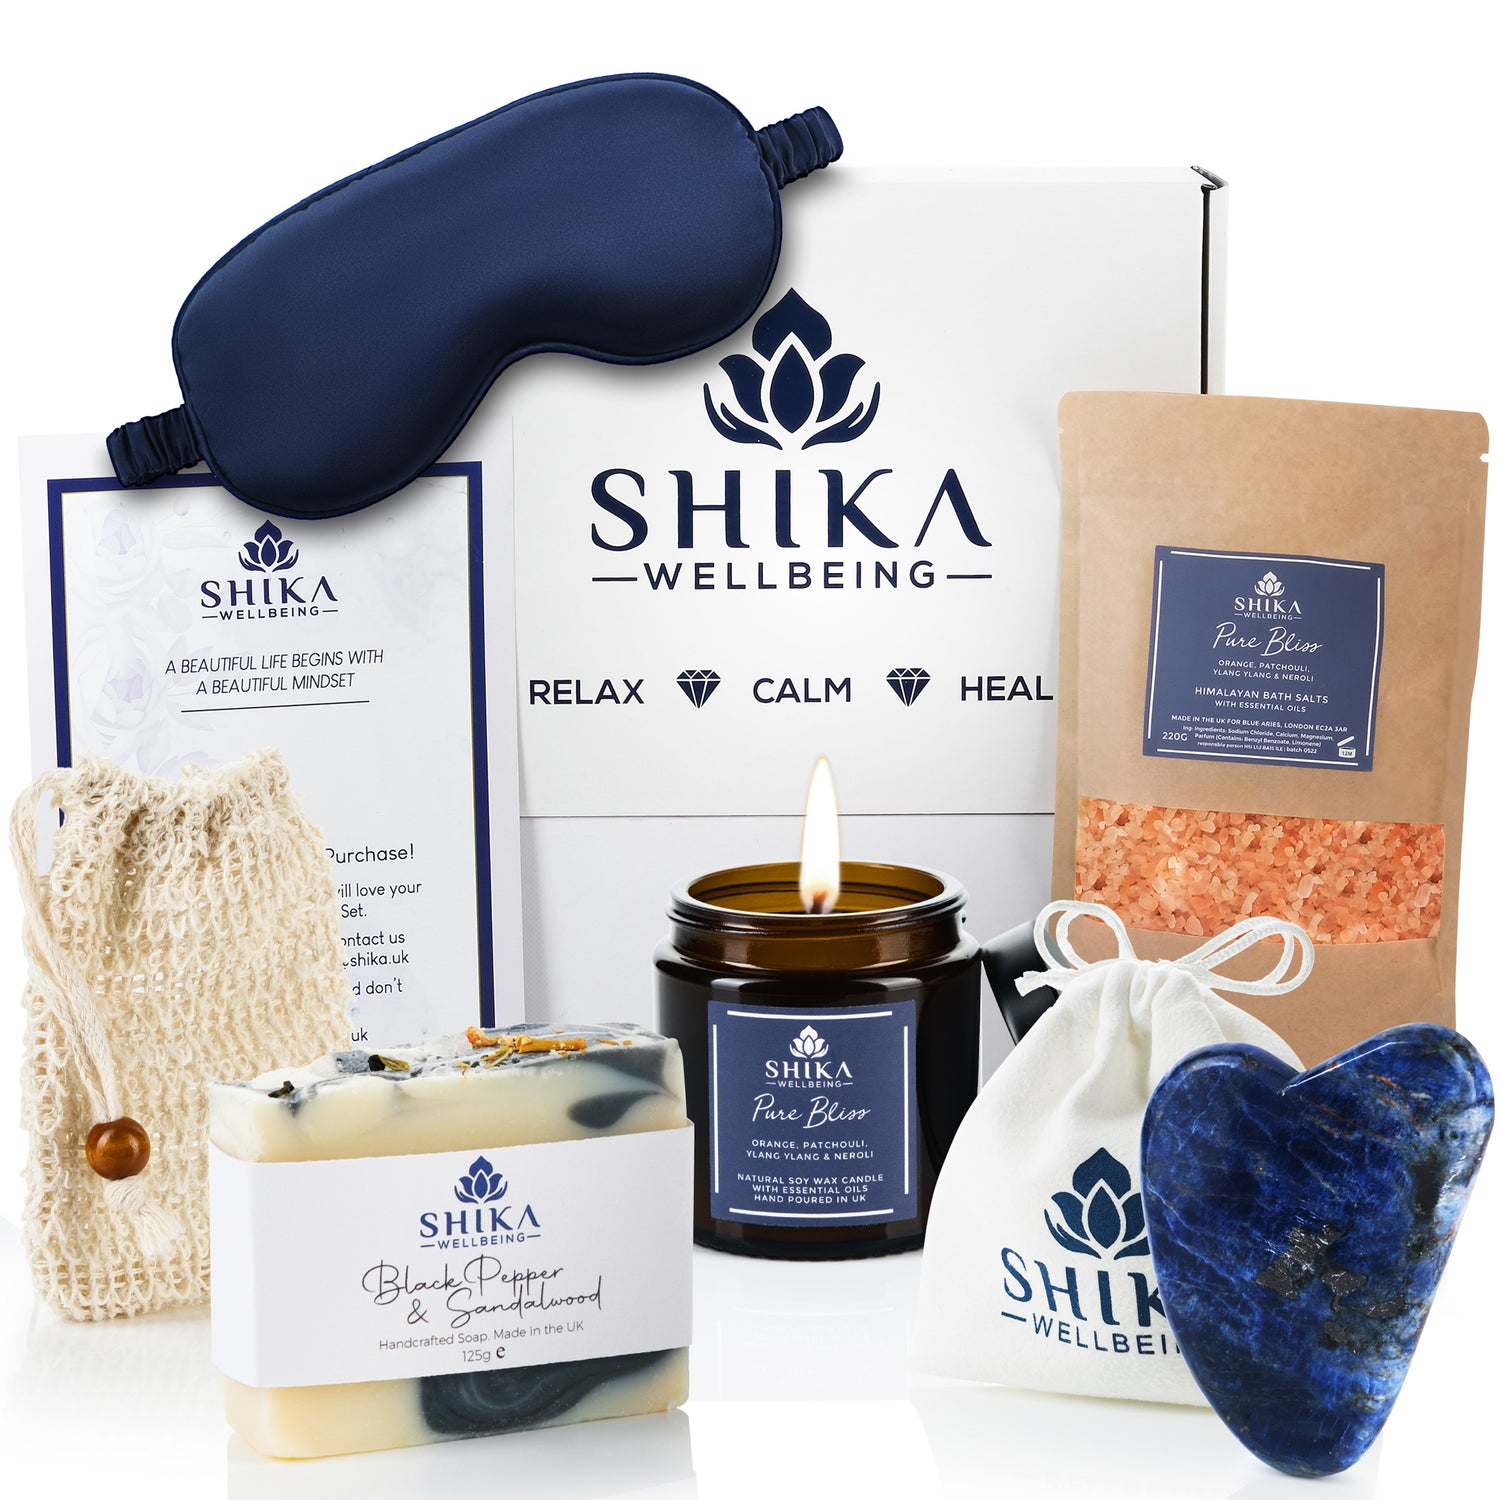 Image of the Shika Wellbeing Bliss Relaxation aromatherapy gift set for women